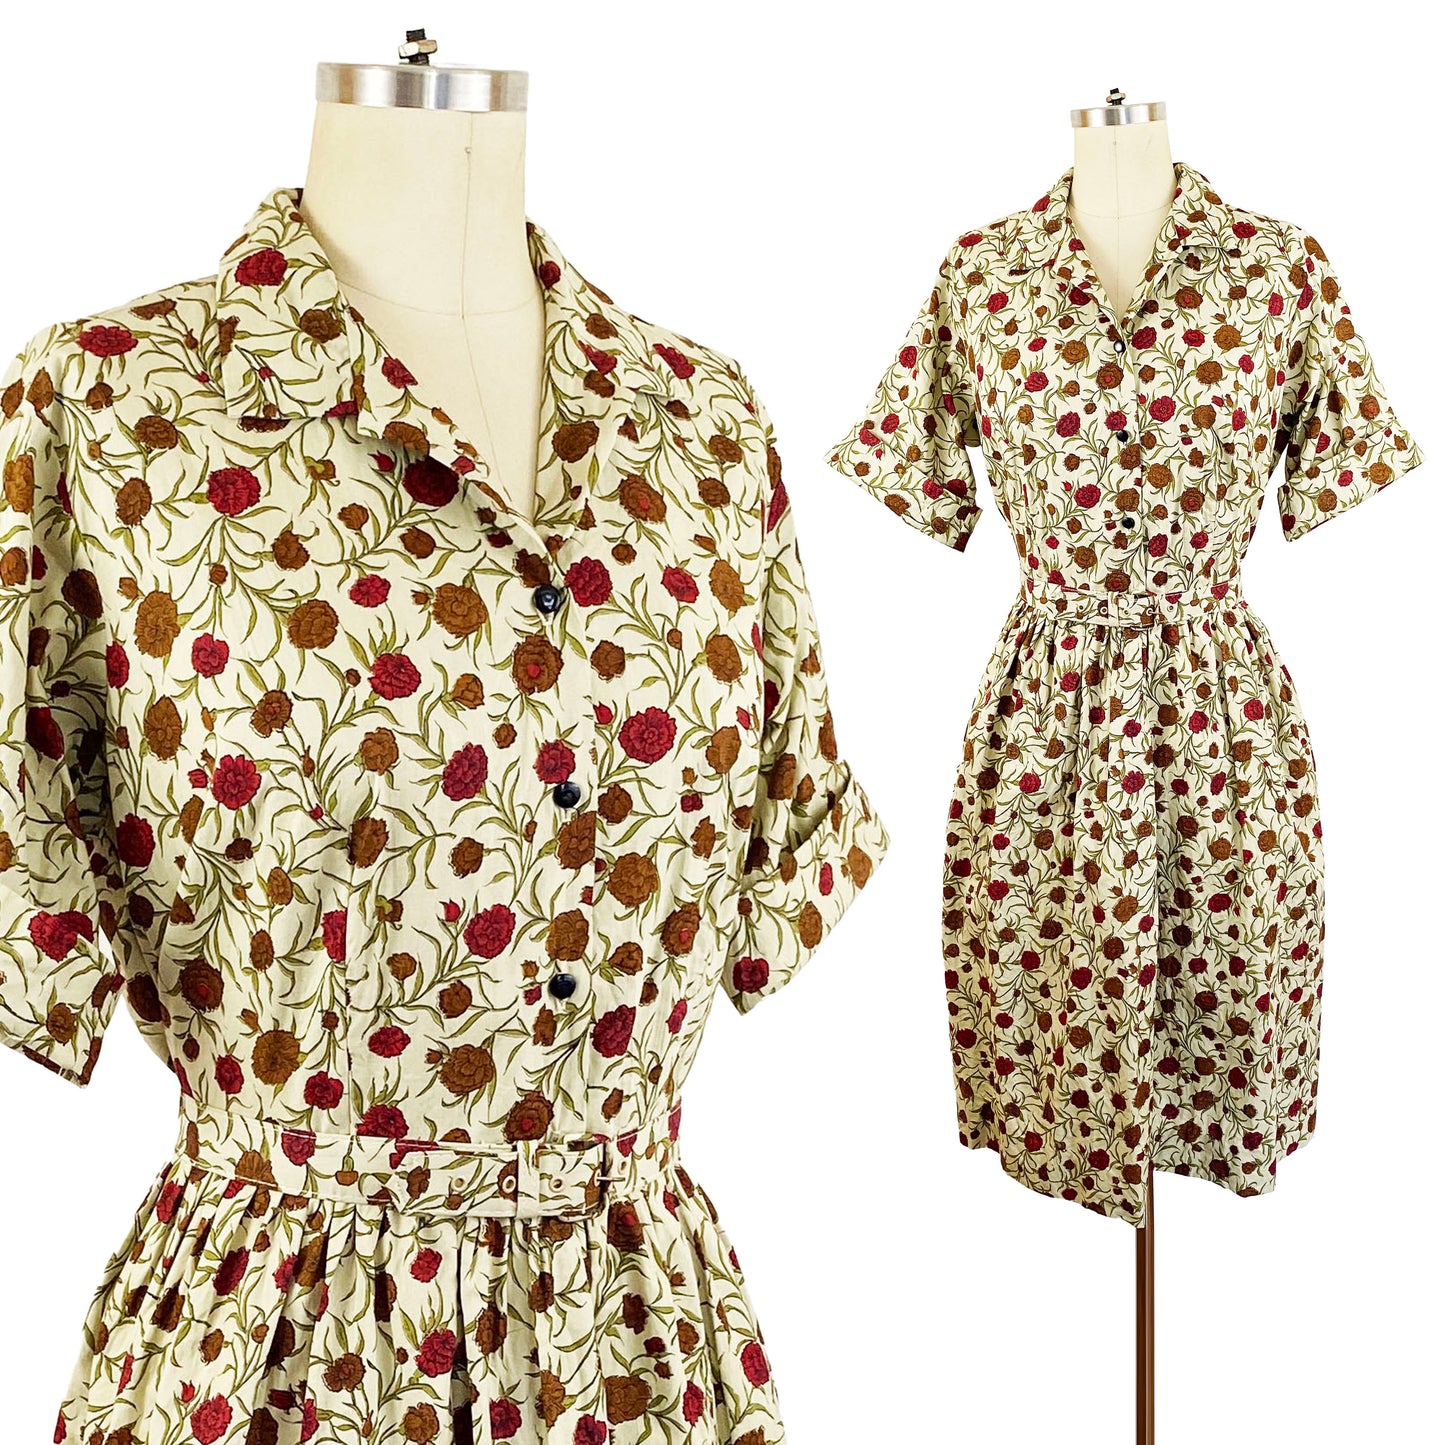 1950s Cotton Autumn Floral Carnation Light Green and Red Fit and Flare Shirtwaist Dress Day Dress / Vintage Plus Size XL 12